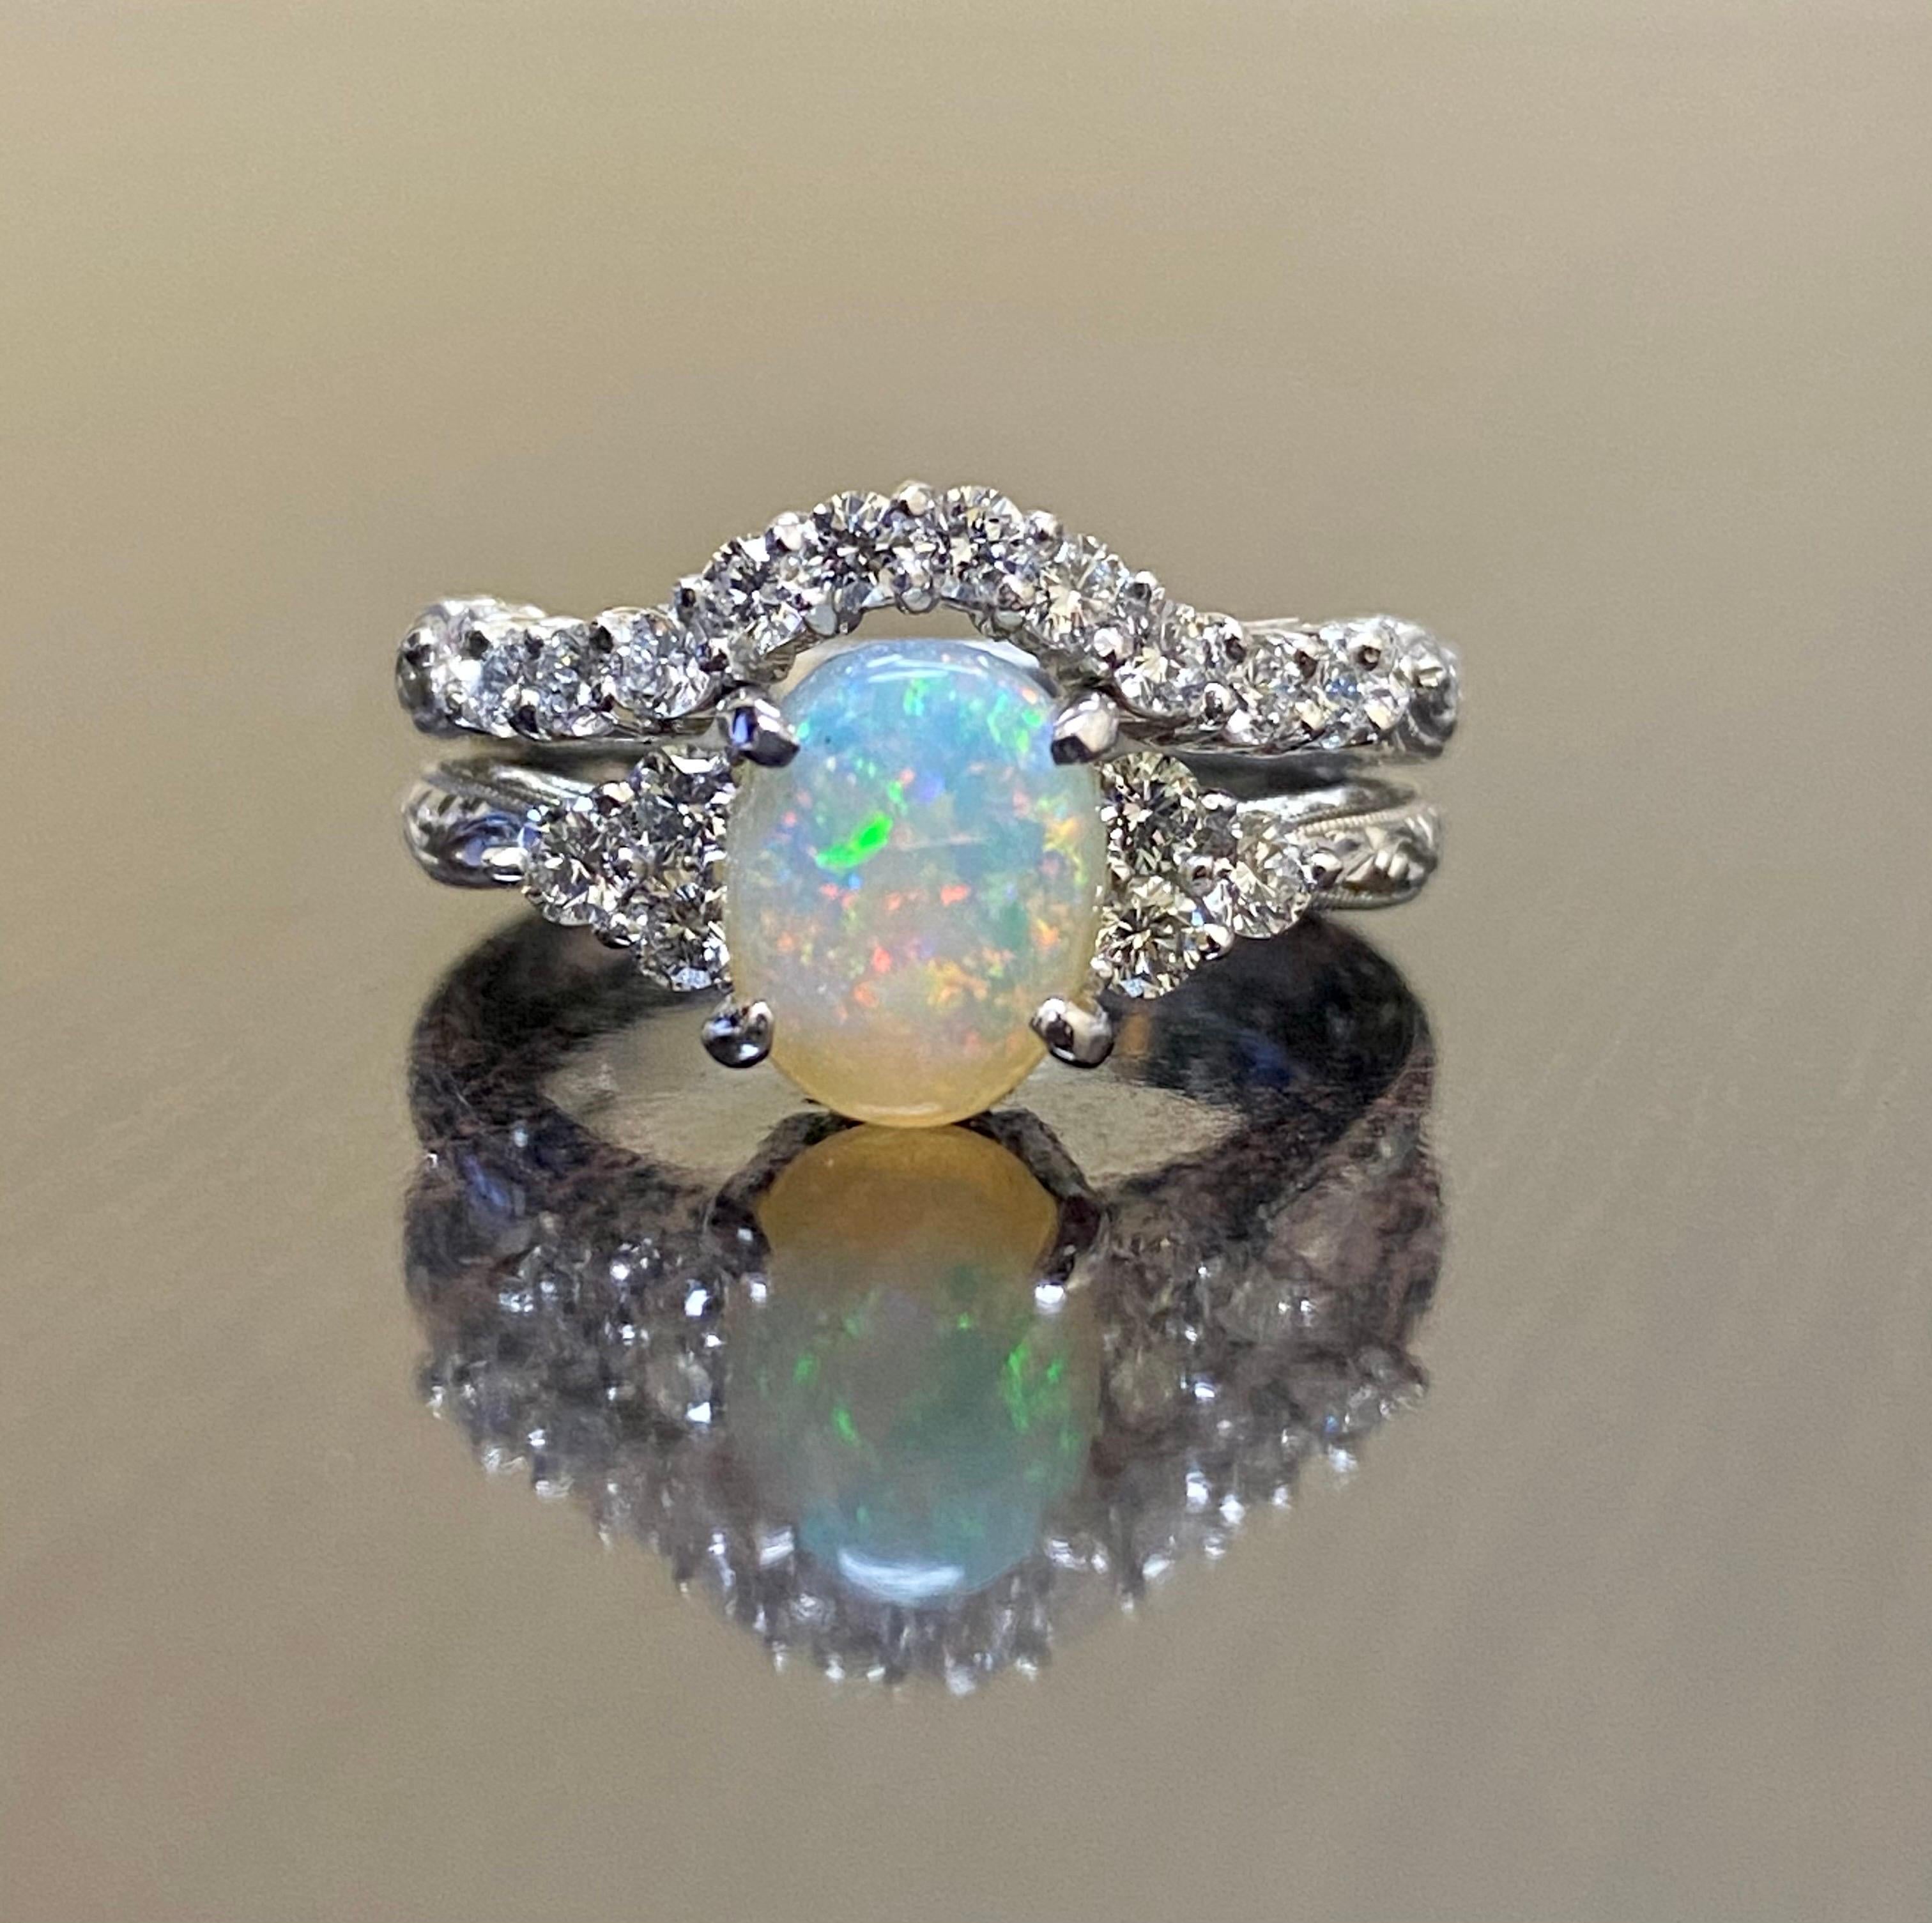 DeKara Designs Collection

Our latest design! An elegant and lustrous Opal cabochon and diamond platinum entirely handmade and hand engraved engagement ring with matching band.

Metal- 90% Platinum, 10% Iridium.

Stones- Engagement Ring Center